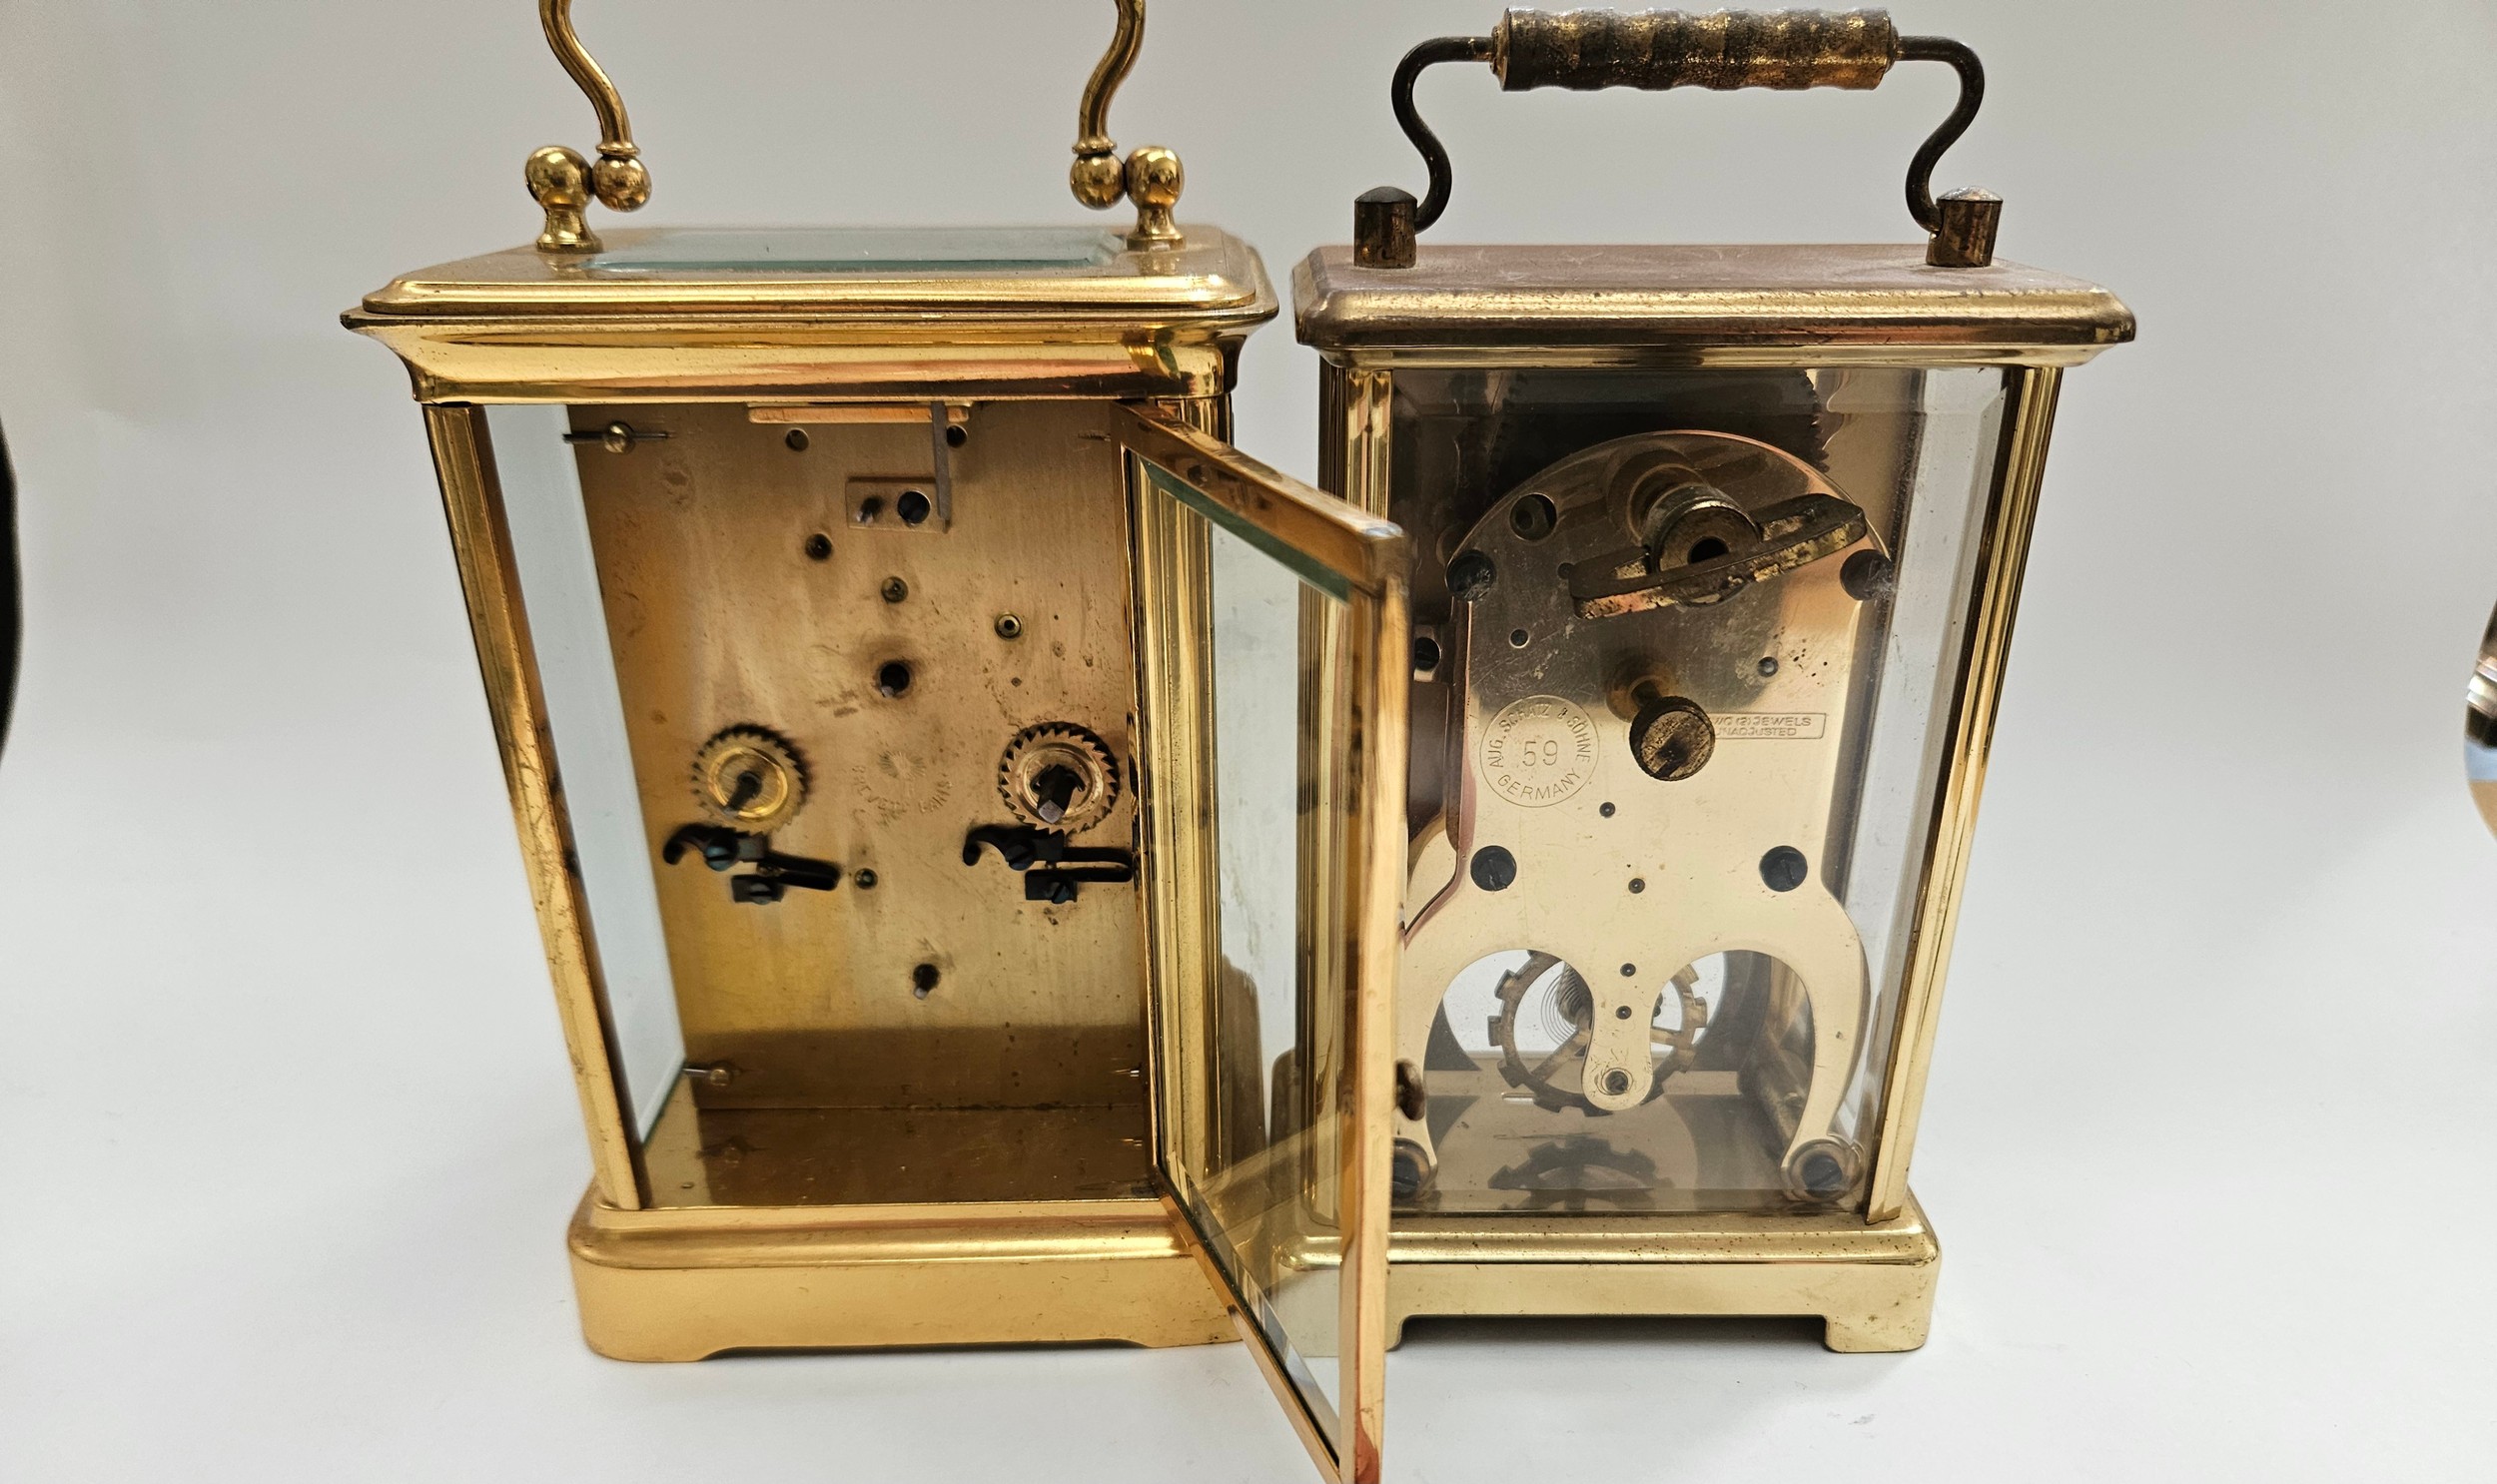 A Schatz 8-day carriage timepiece with pin pallet escapement, with another carriage timepiece with - Image 4 of 6